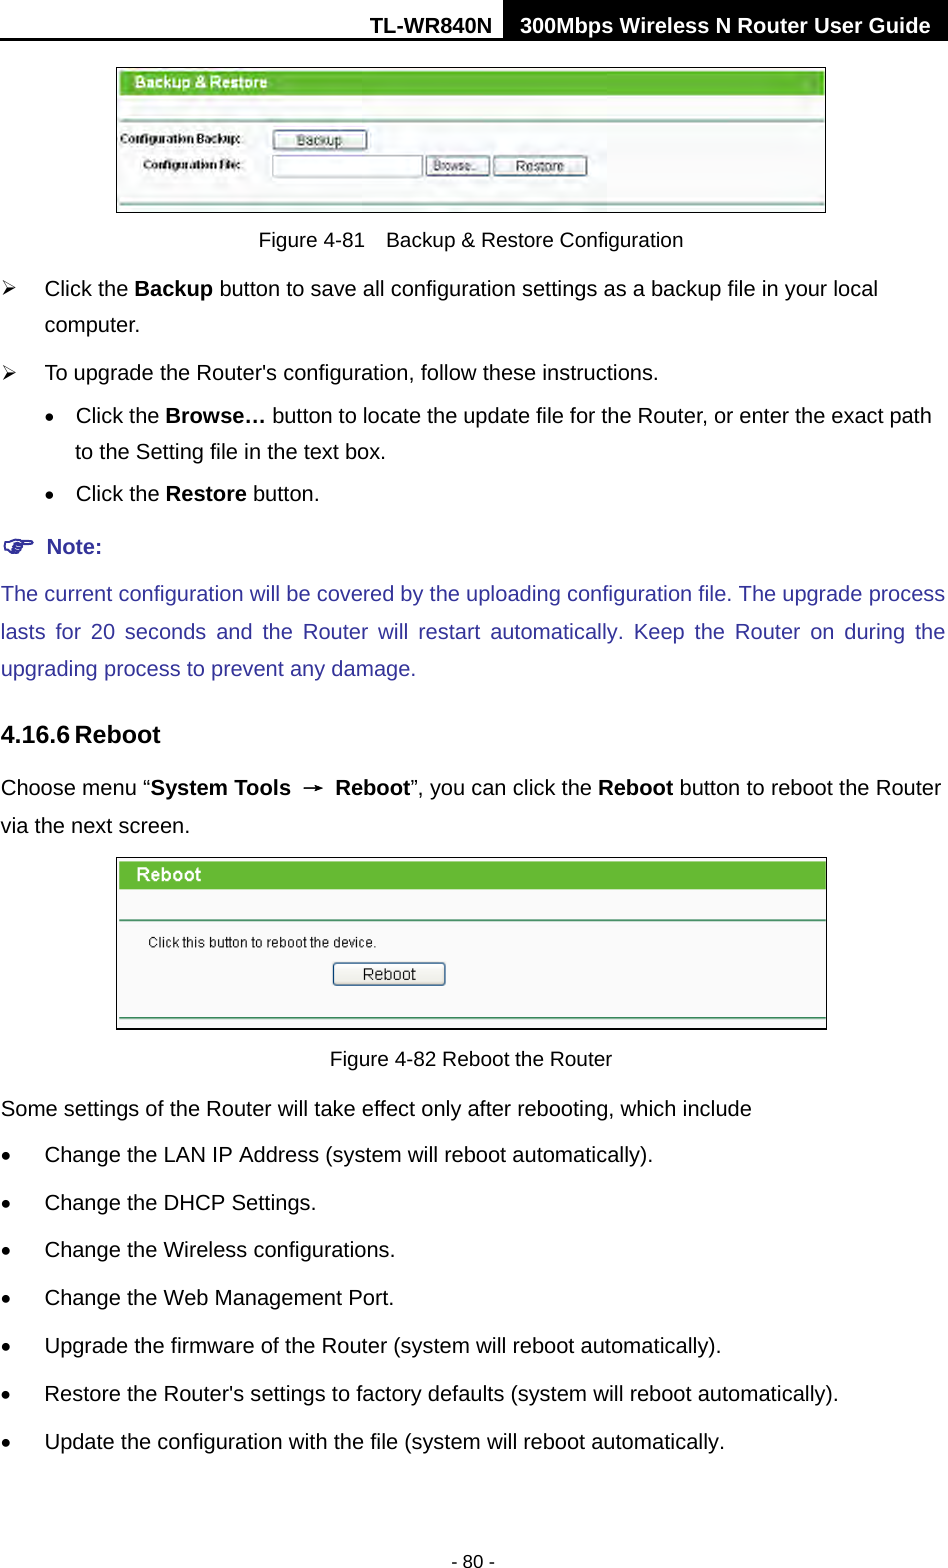 TL-WR840N 300Mbps Wireless N Router User Guide  - 80 -  Figure 4-81  Backup &amp; Restore Configuration  Click the Backup button to save all configuration settings as a backup file in your local computer.    To upgrade the Router&apos;s configuration, follow these instructions. • Click the Browse… button to locate the update file for the Router, or enter the exact path to the Setting file in the text box. • Click the Restore button.  Note: The current configuration will be covered by the uploading configuration file. The upgrade process lasts for 20 seconds and the Router will restart automatically. Keep the Router on during the upgrading process to prevent any damage.   4.16.6 Reboot Choose menu “System Tools → Reboot”, you can click the Reboot button to reboot the Router via the next screen.  Figure 4-82 Reboot the Router Some settings of the Router will take effect only after rebooting, which include •  Change the LAN IP Address (system will reboot automatically). •  Change the DHCP Settings. •  Change the Wireless configurations. •  Change the Web Management Port. • Upgrade the firmware of the Router (system will reboot automatically). • Restore the Router&apos;s settings to factory defaults (system will reboot automatically). •  Update the configuration with the file (system will reboot automatically. 